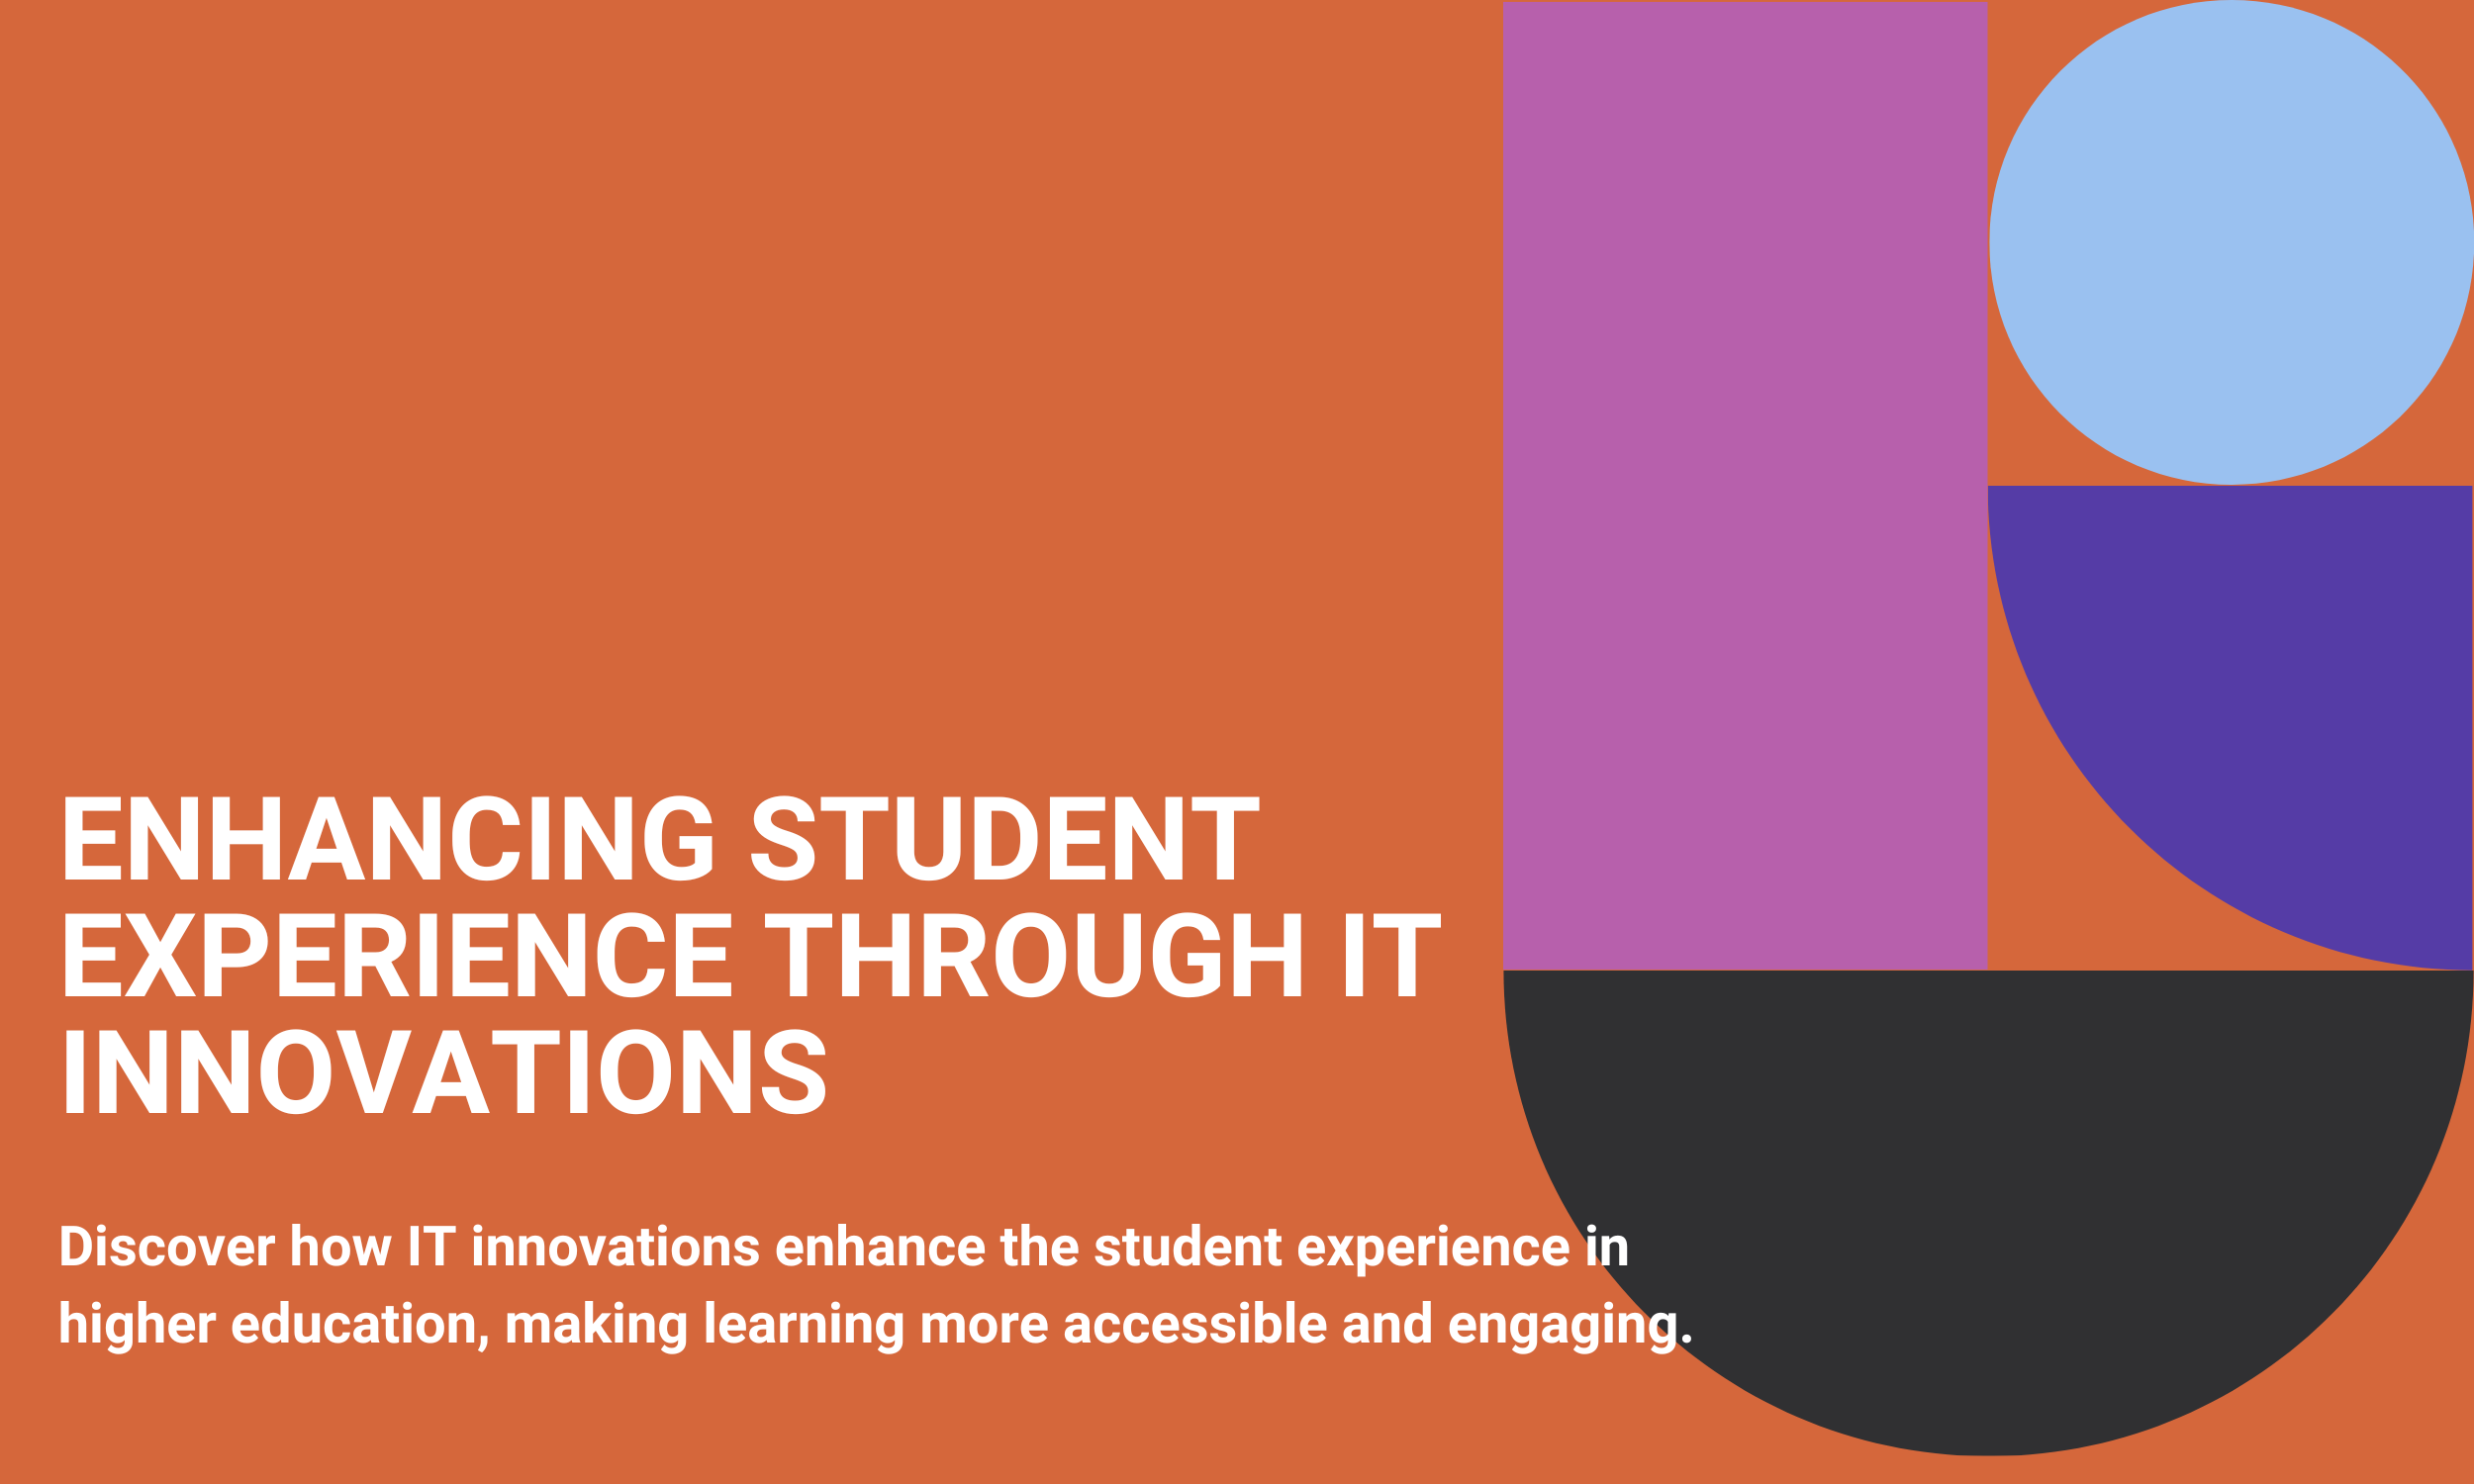 Enhancing Student Experience through IT Innovations